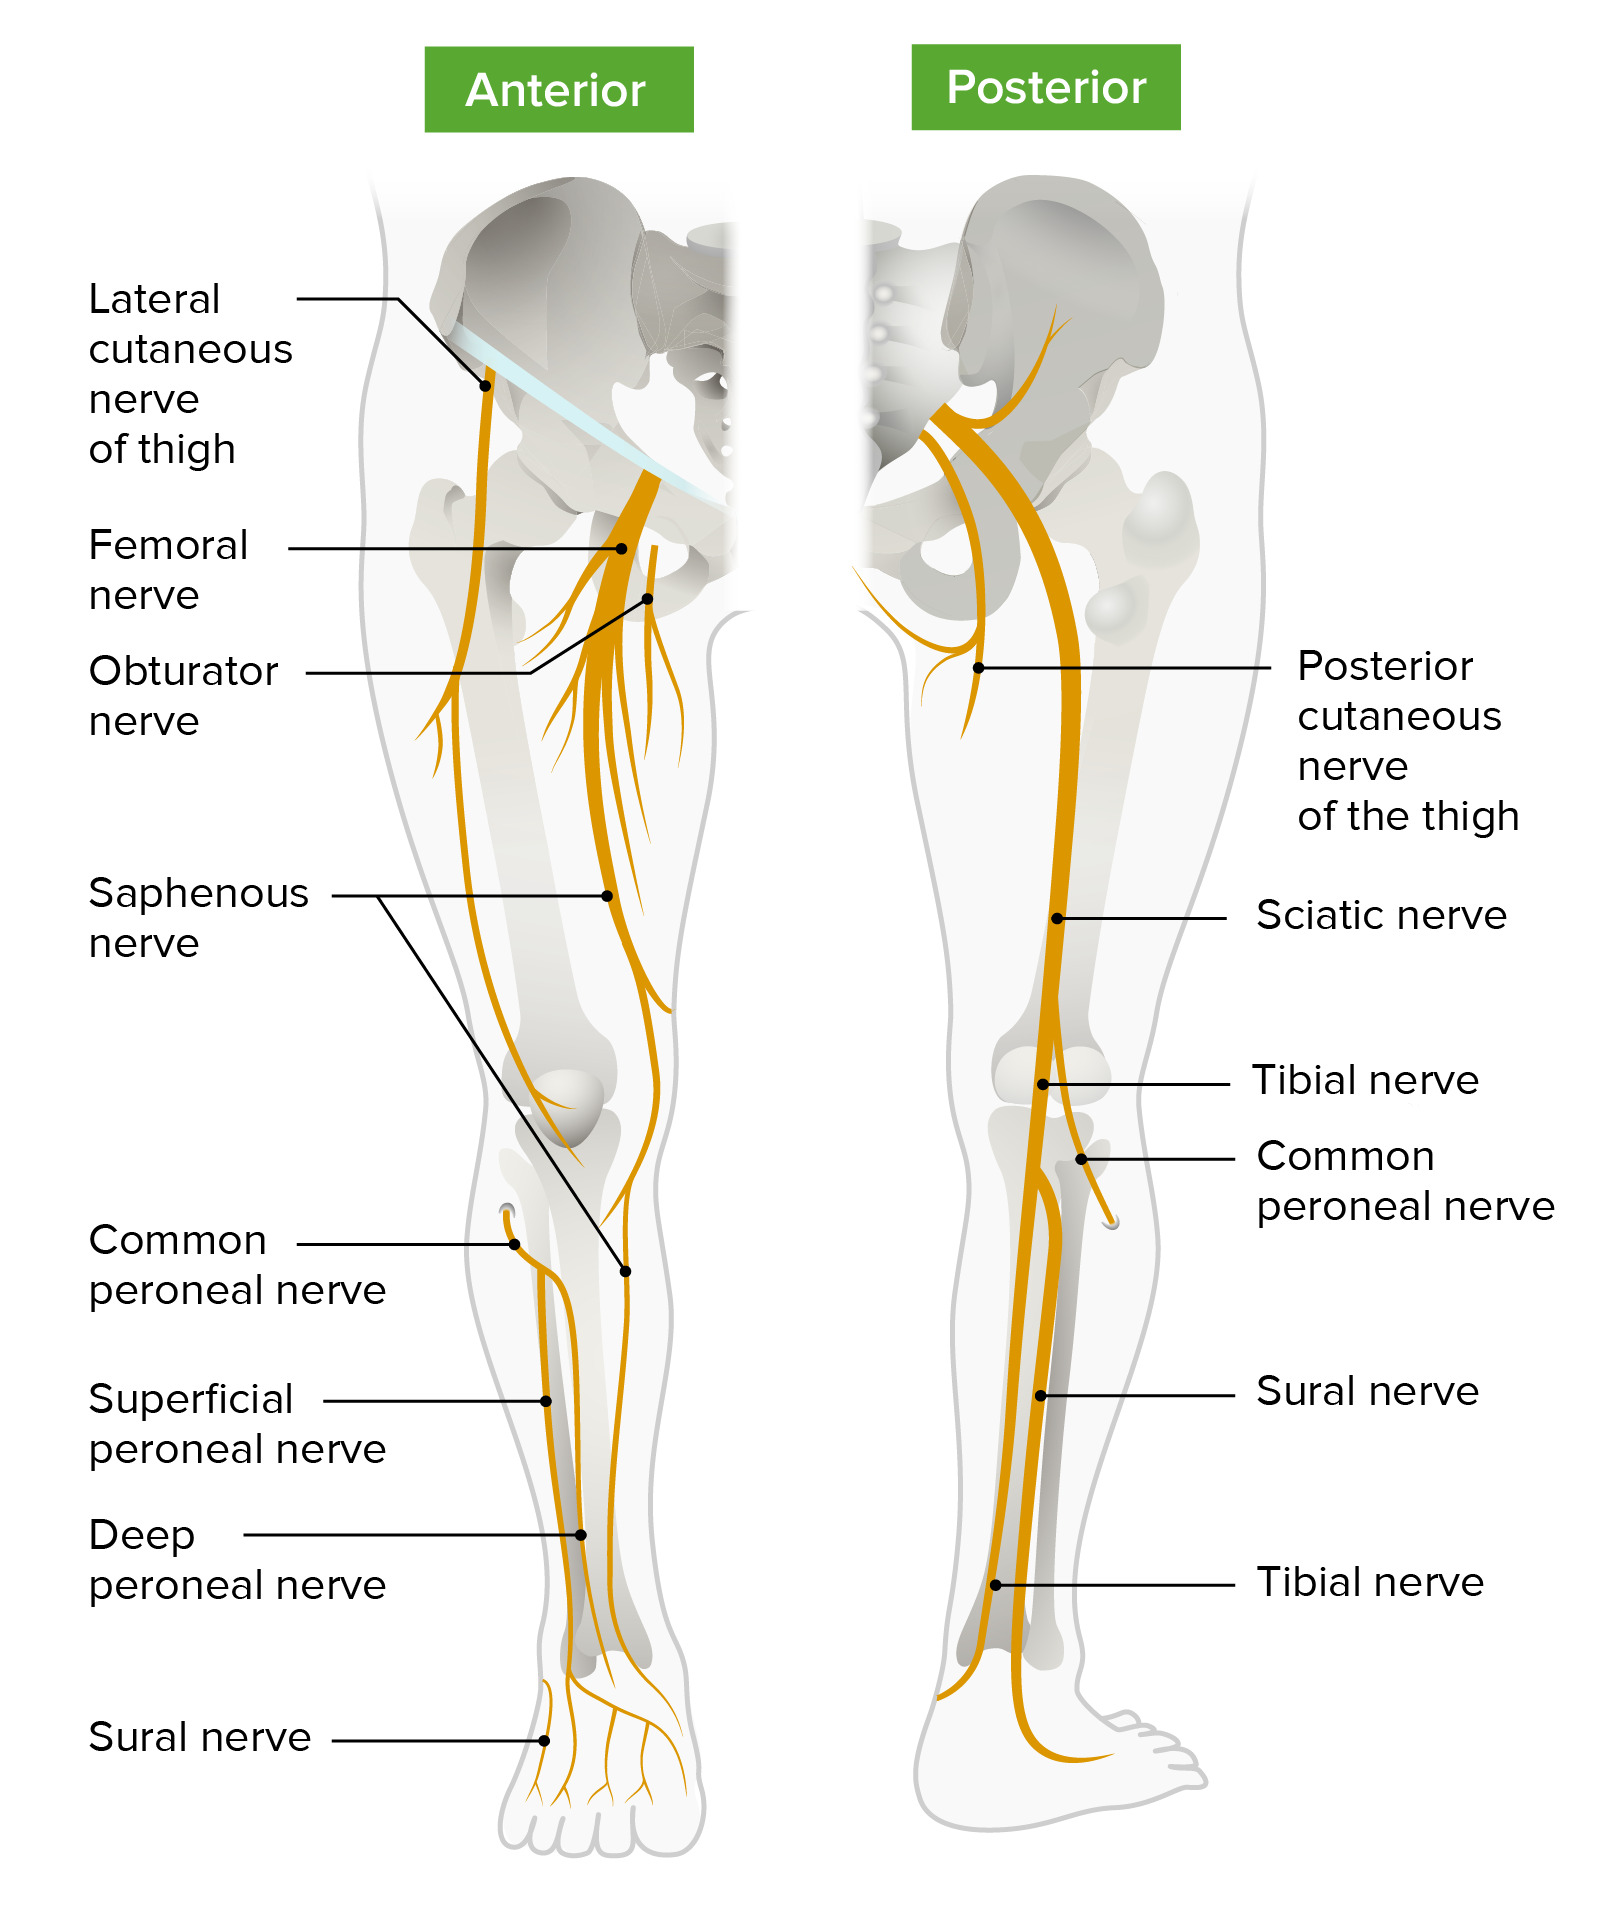 What is the anatomy of the lower leg?